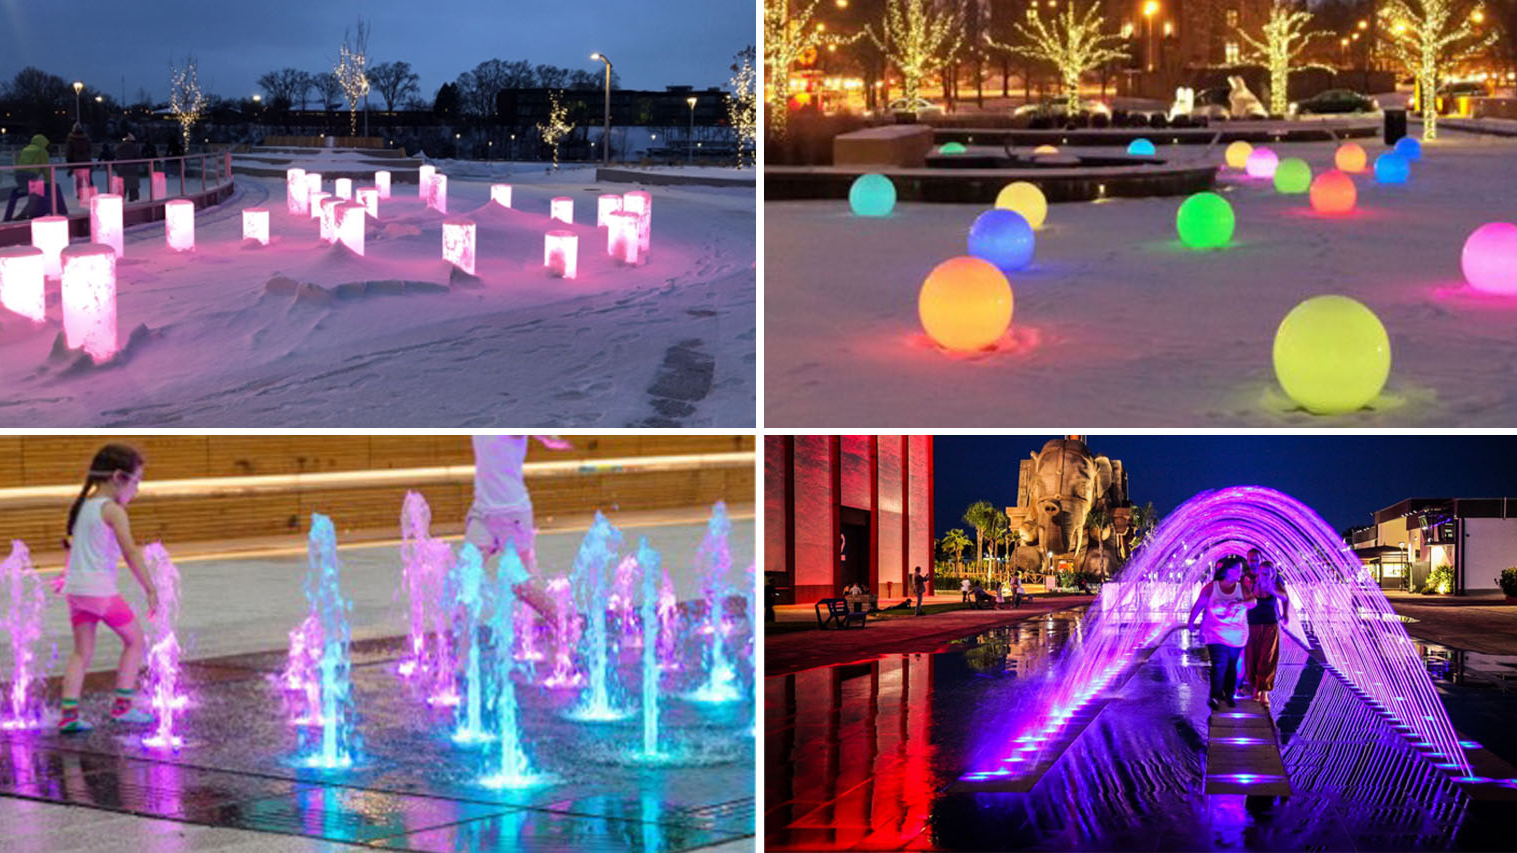 Light and water features along a paved surface 